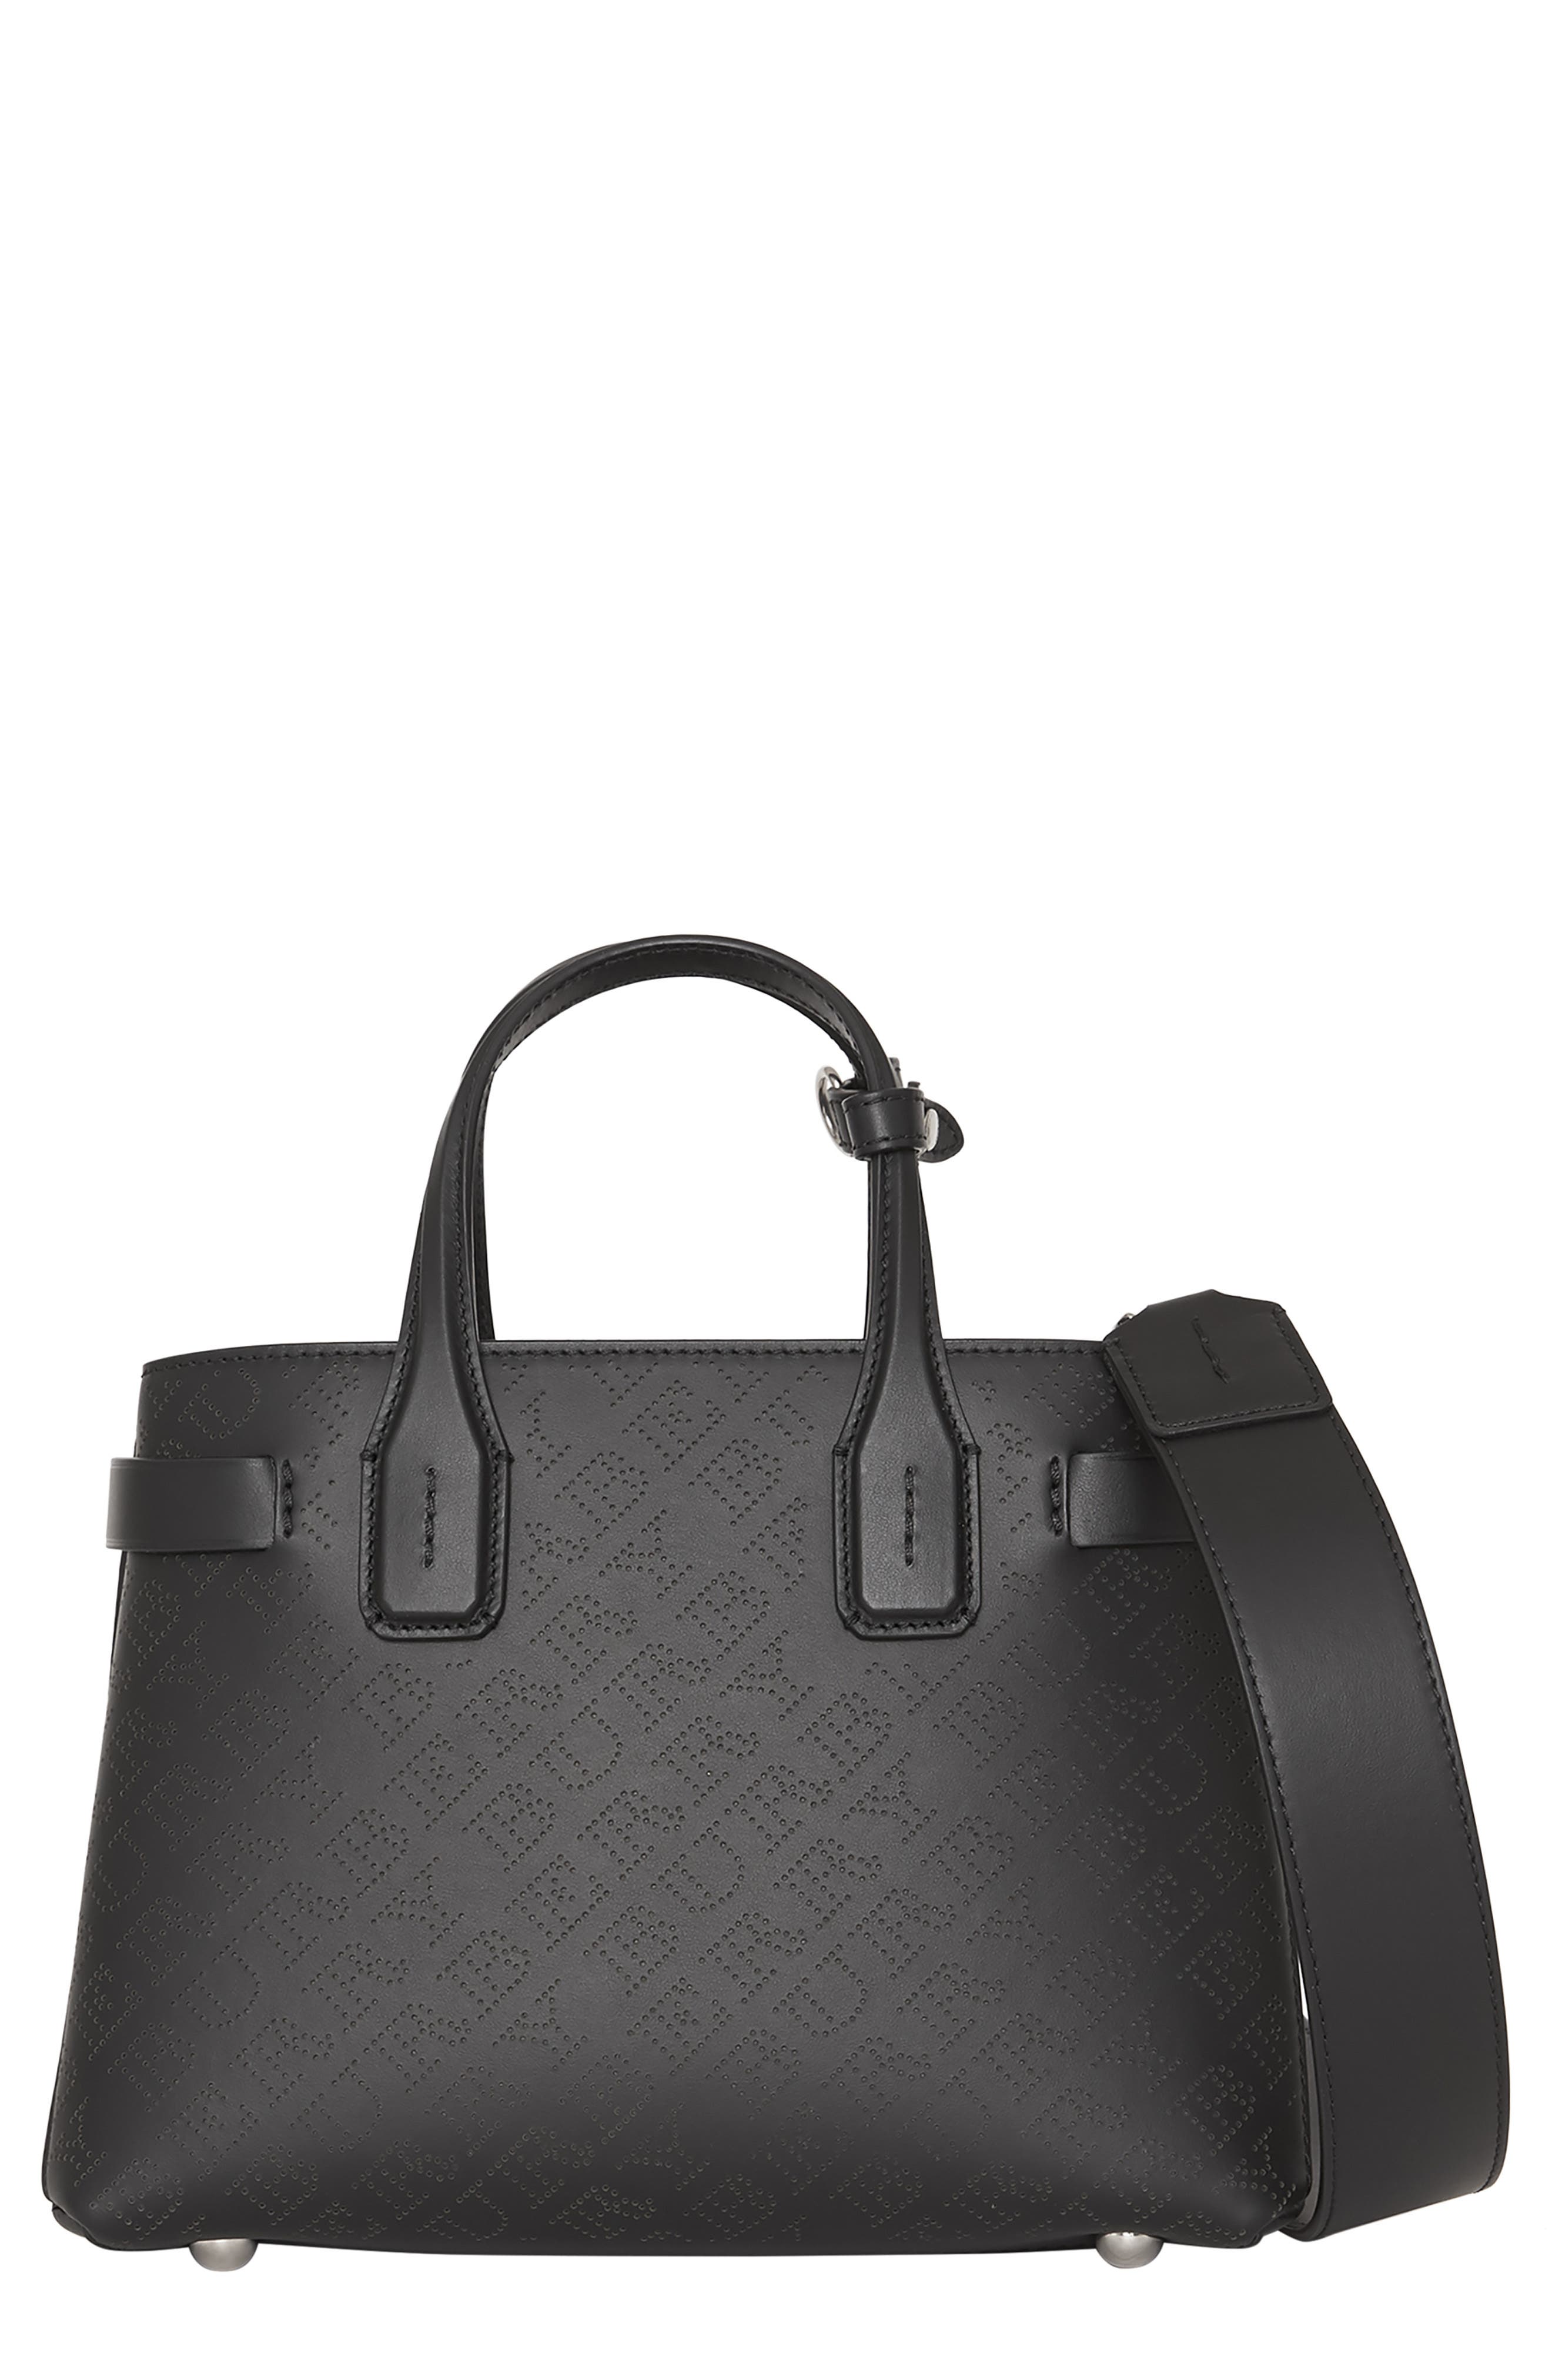 burberry perforated bag